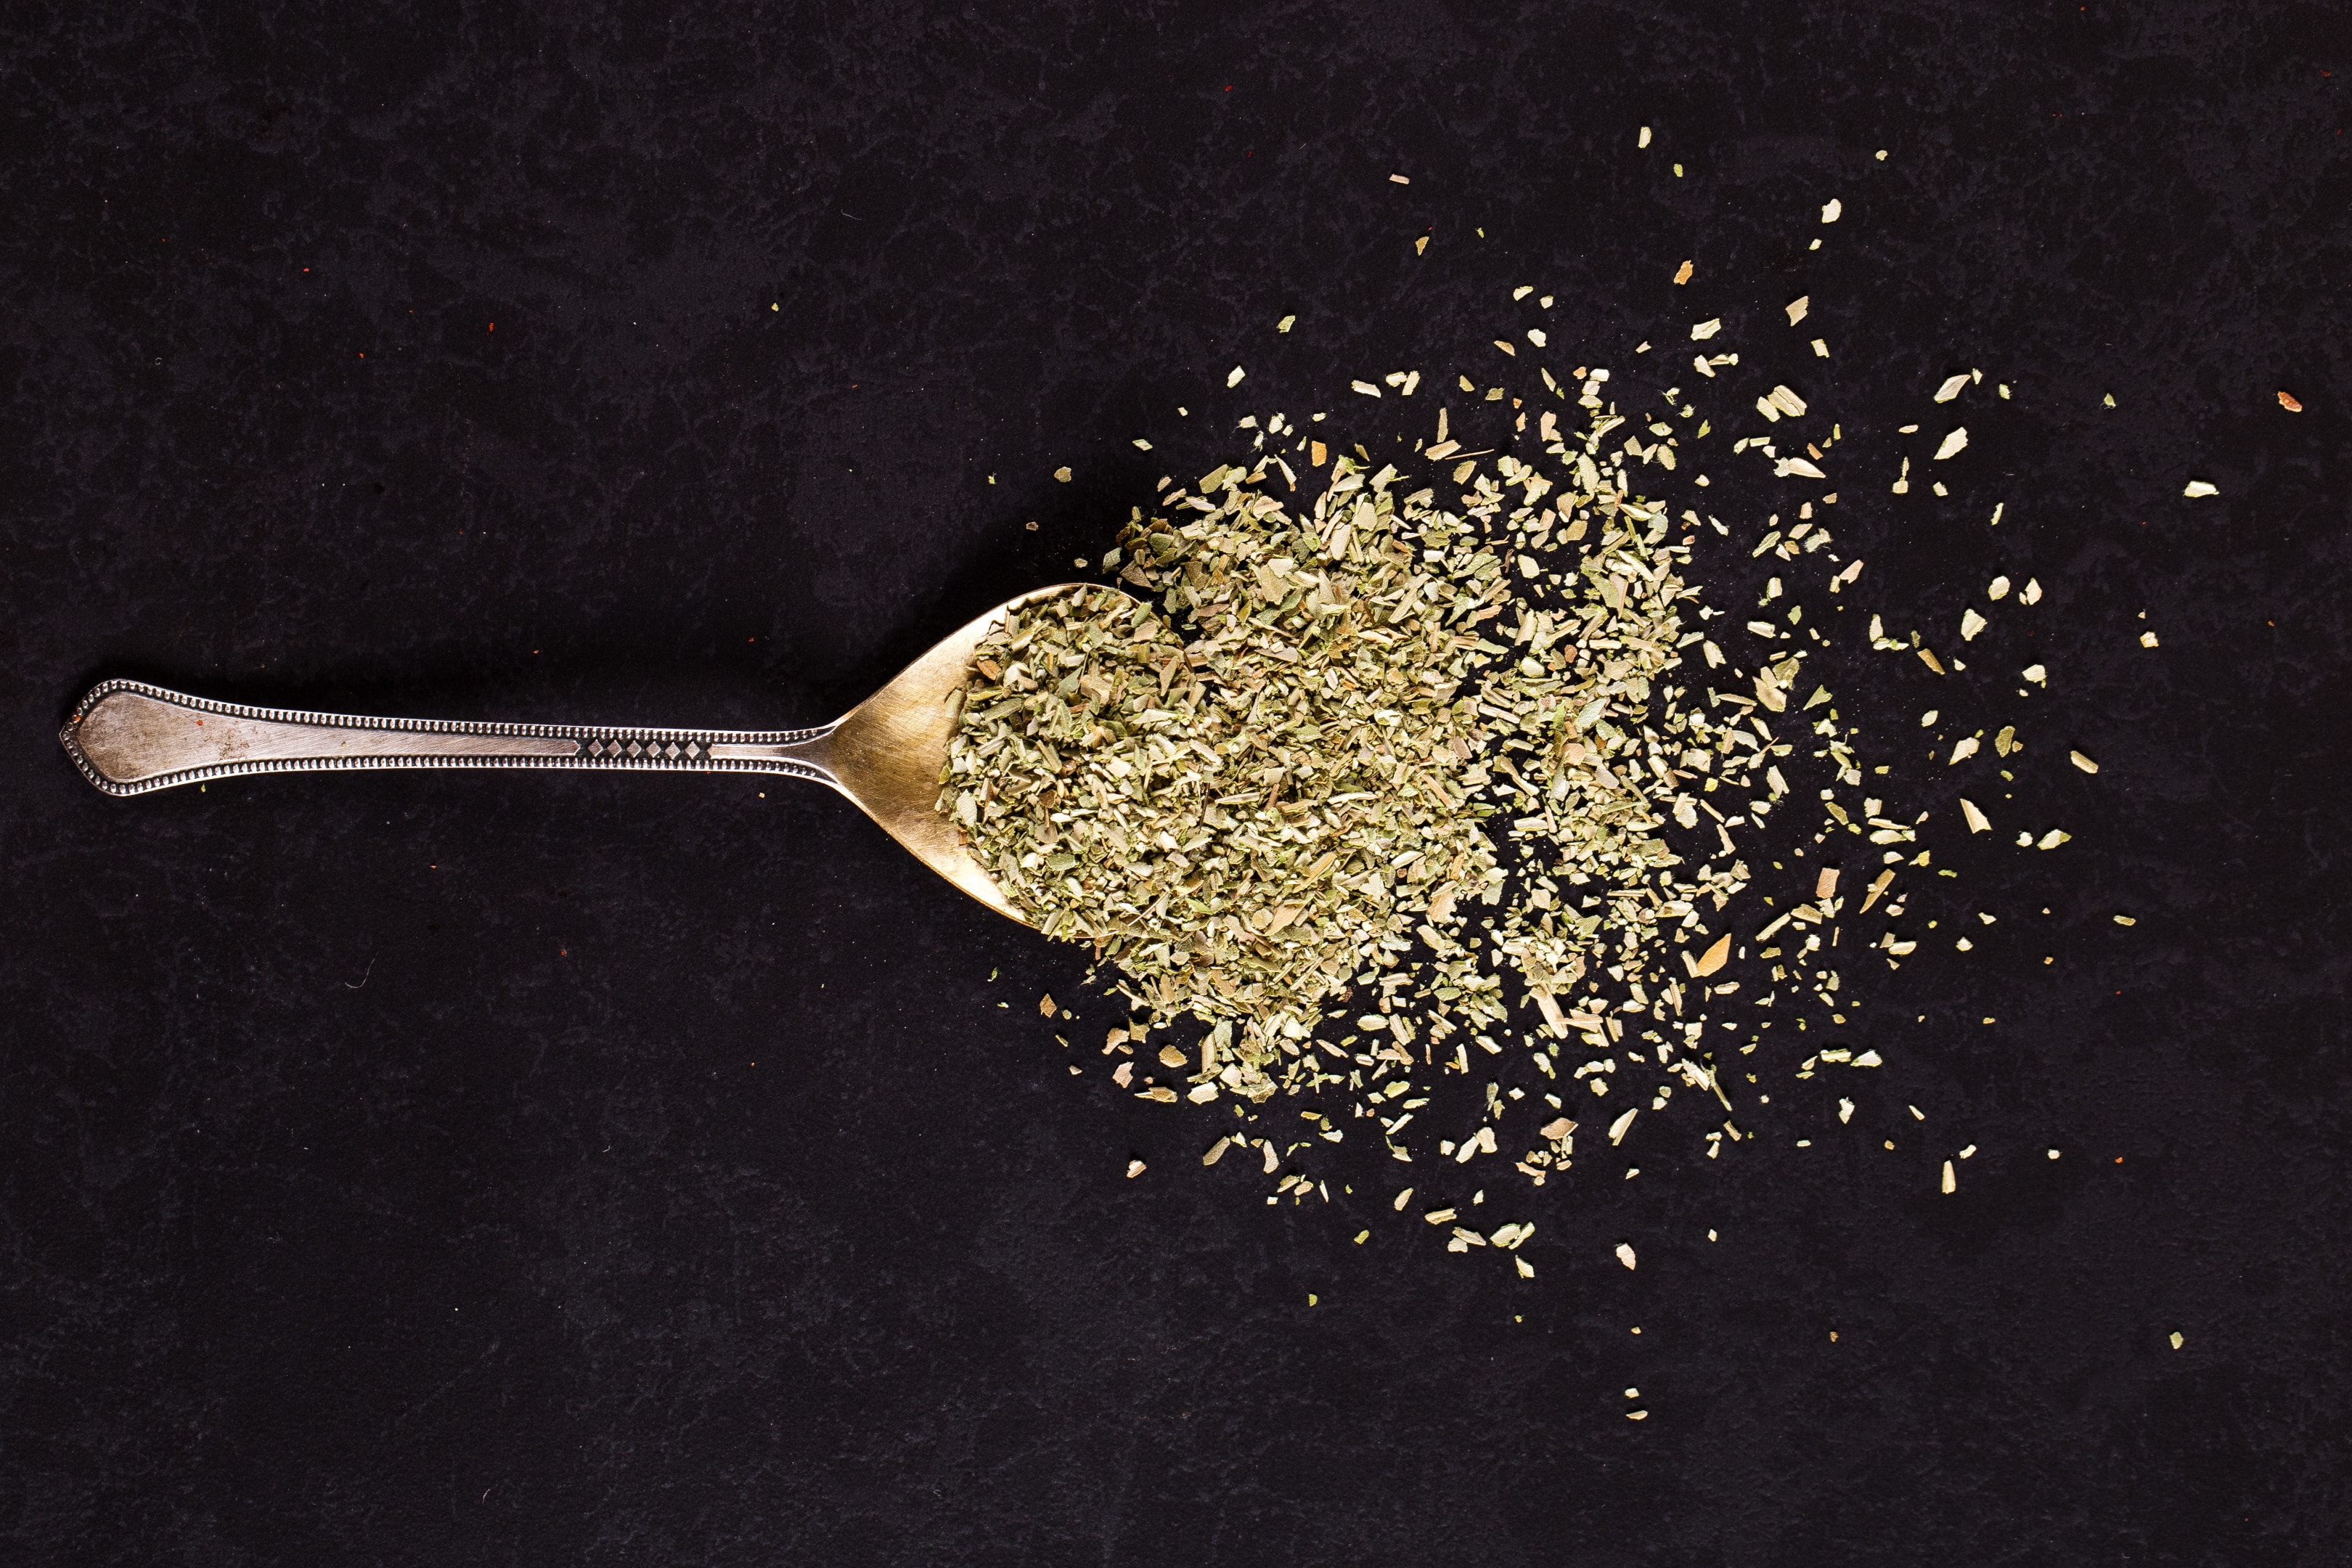 Crushed oregano scattered from iron spoon on black table